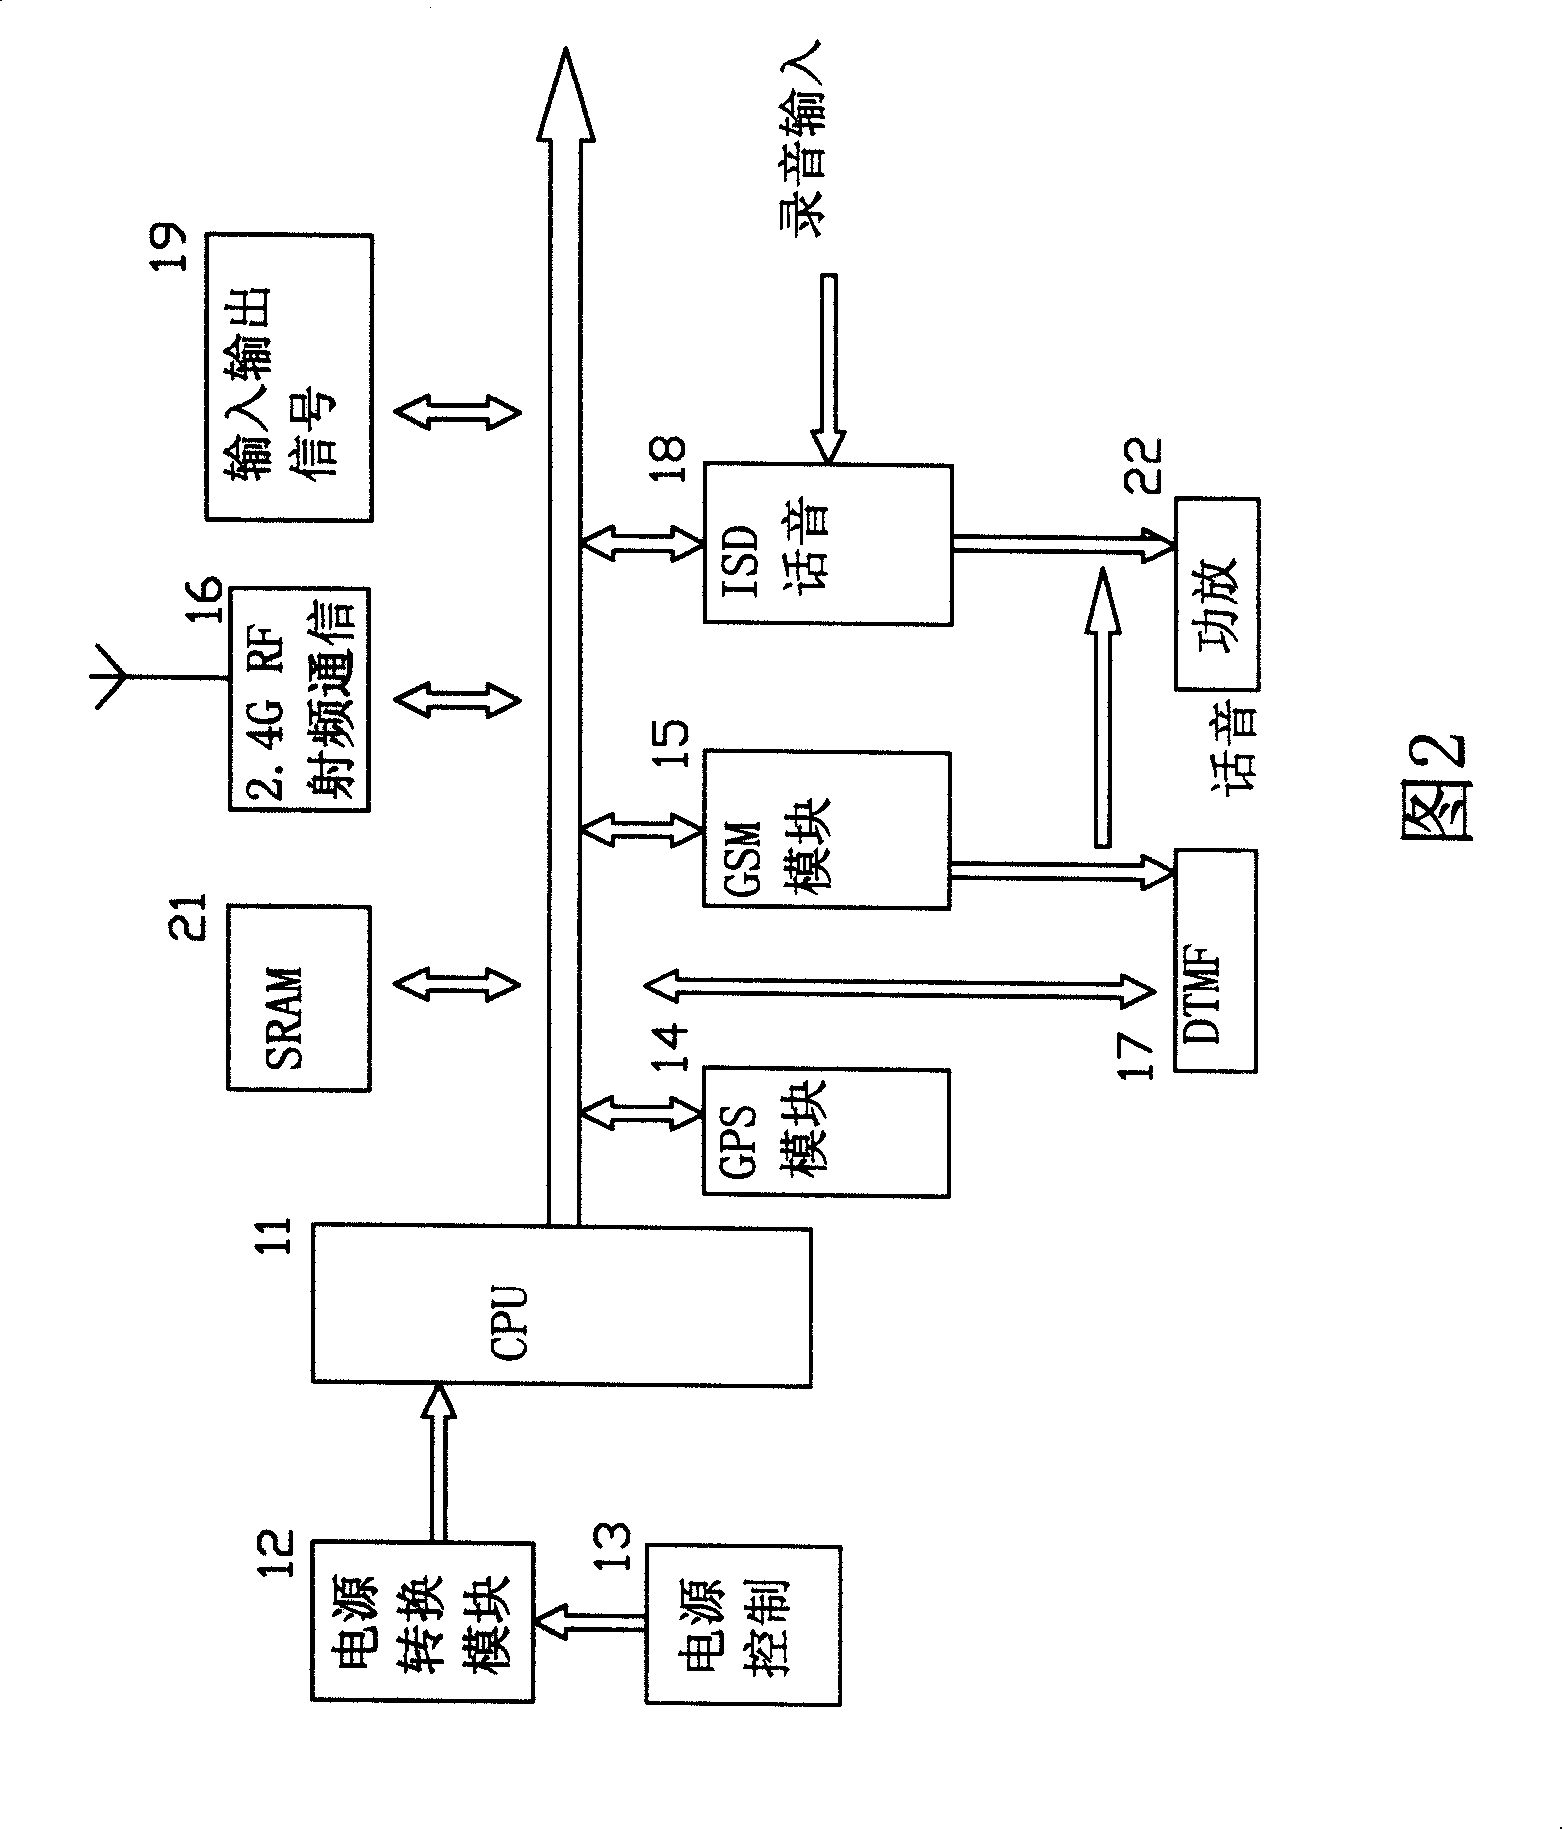 Vehicle mounted terminal integrated with guidance and vocation application